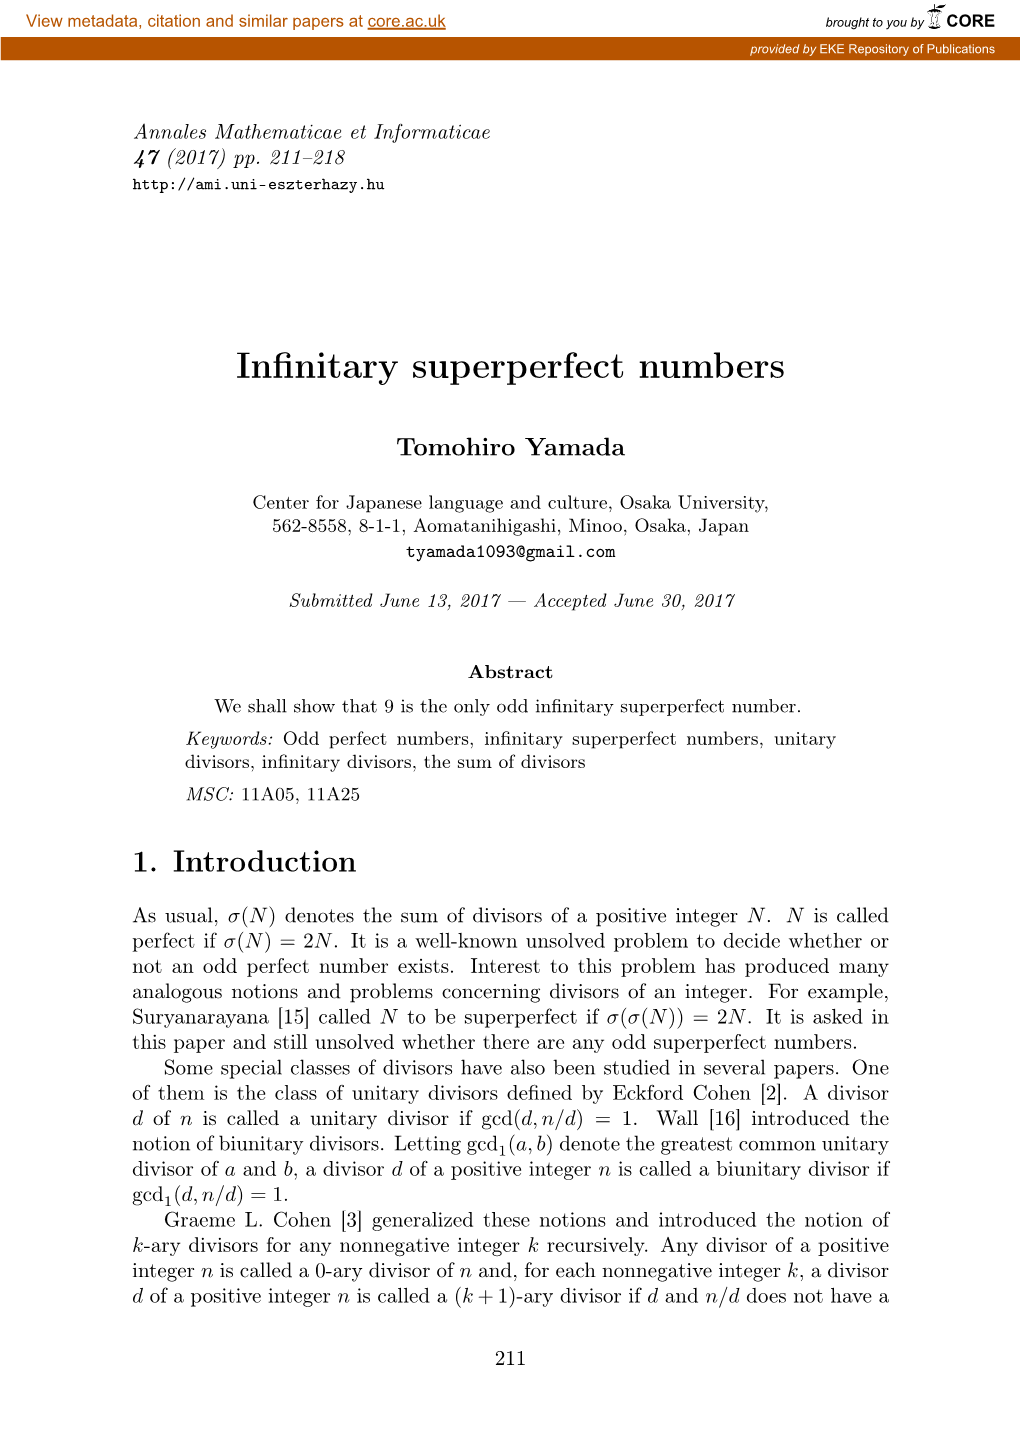 Infinitary Superperfect Numbers